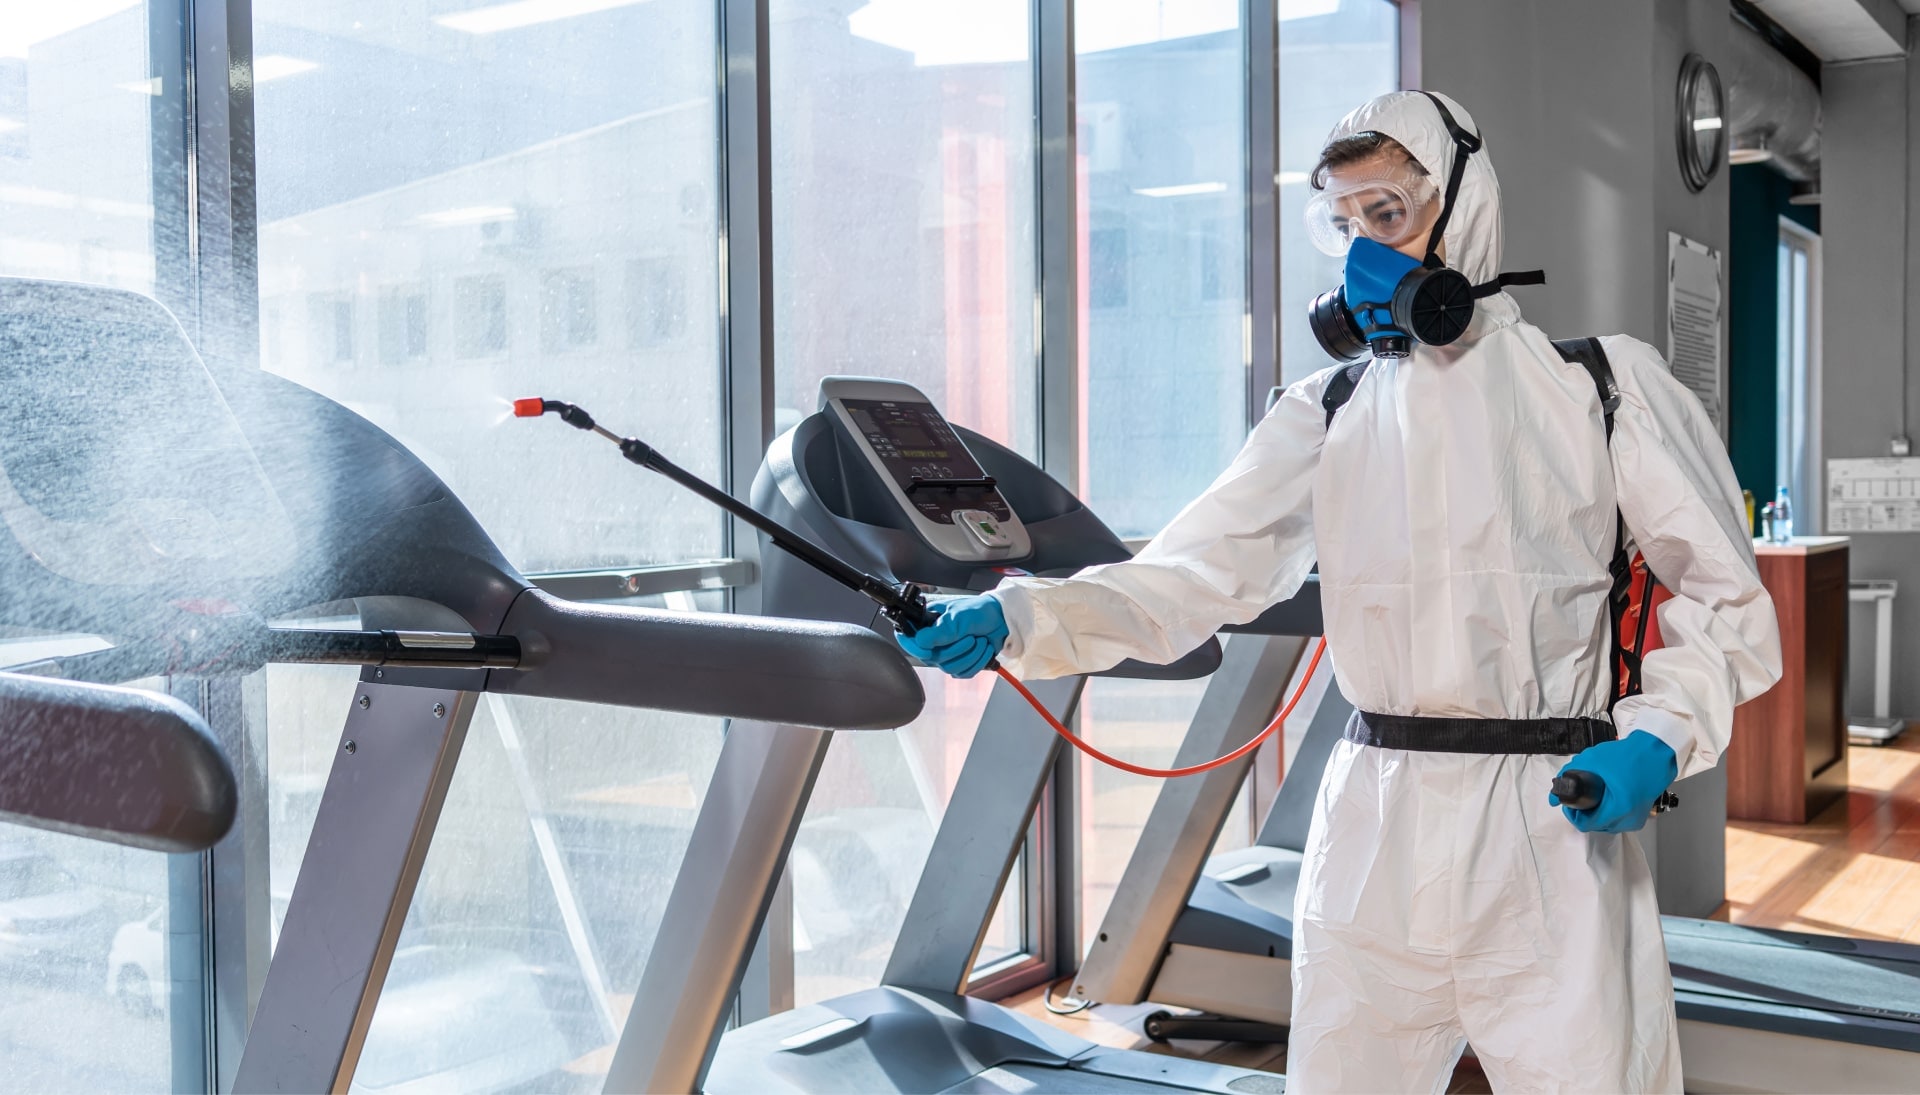 For commercial mold removal, we use the latest technology to identify and eliminate mold damage in Chesterfield, Virginia.